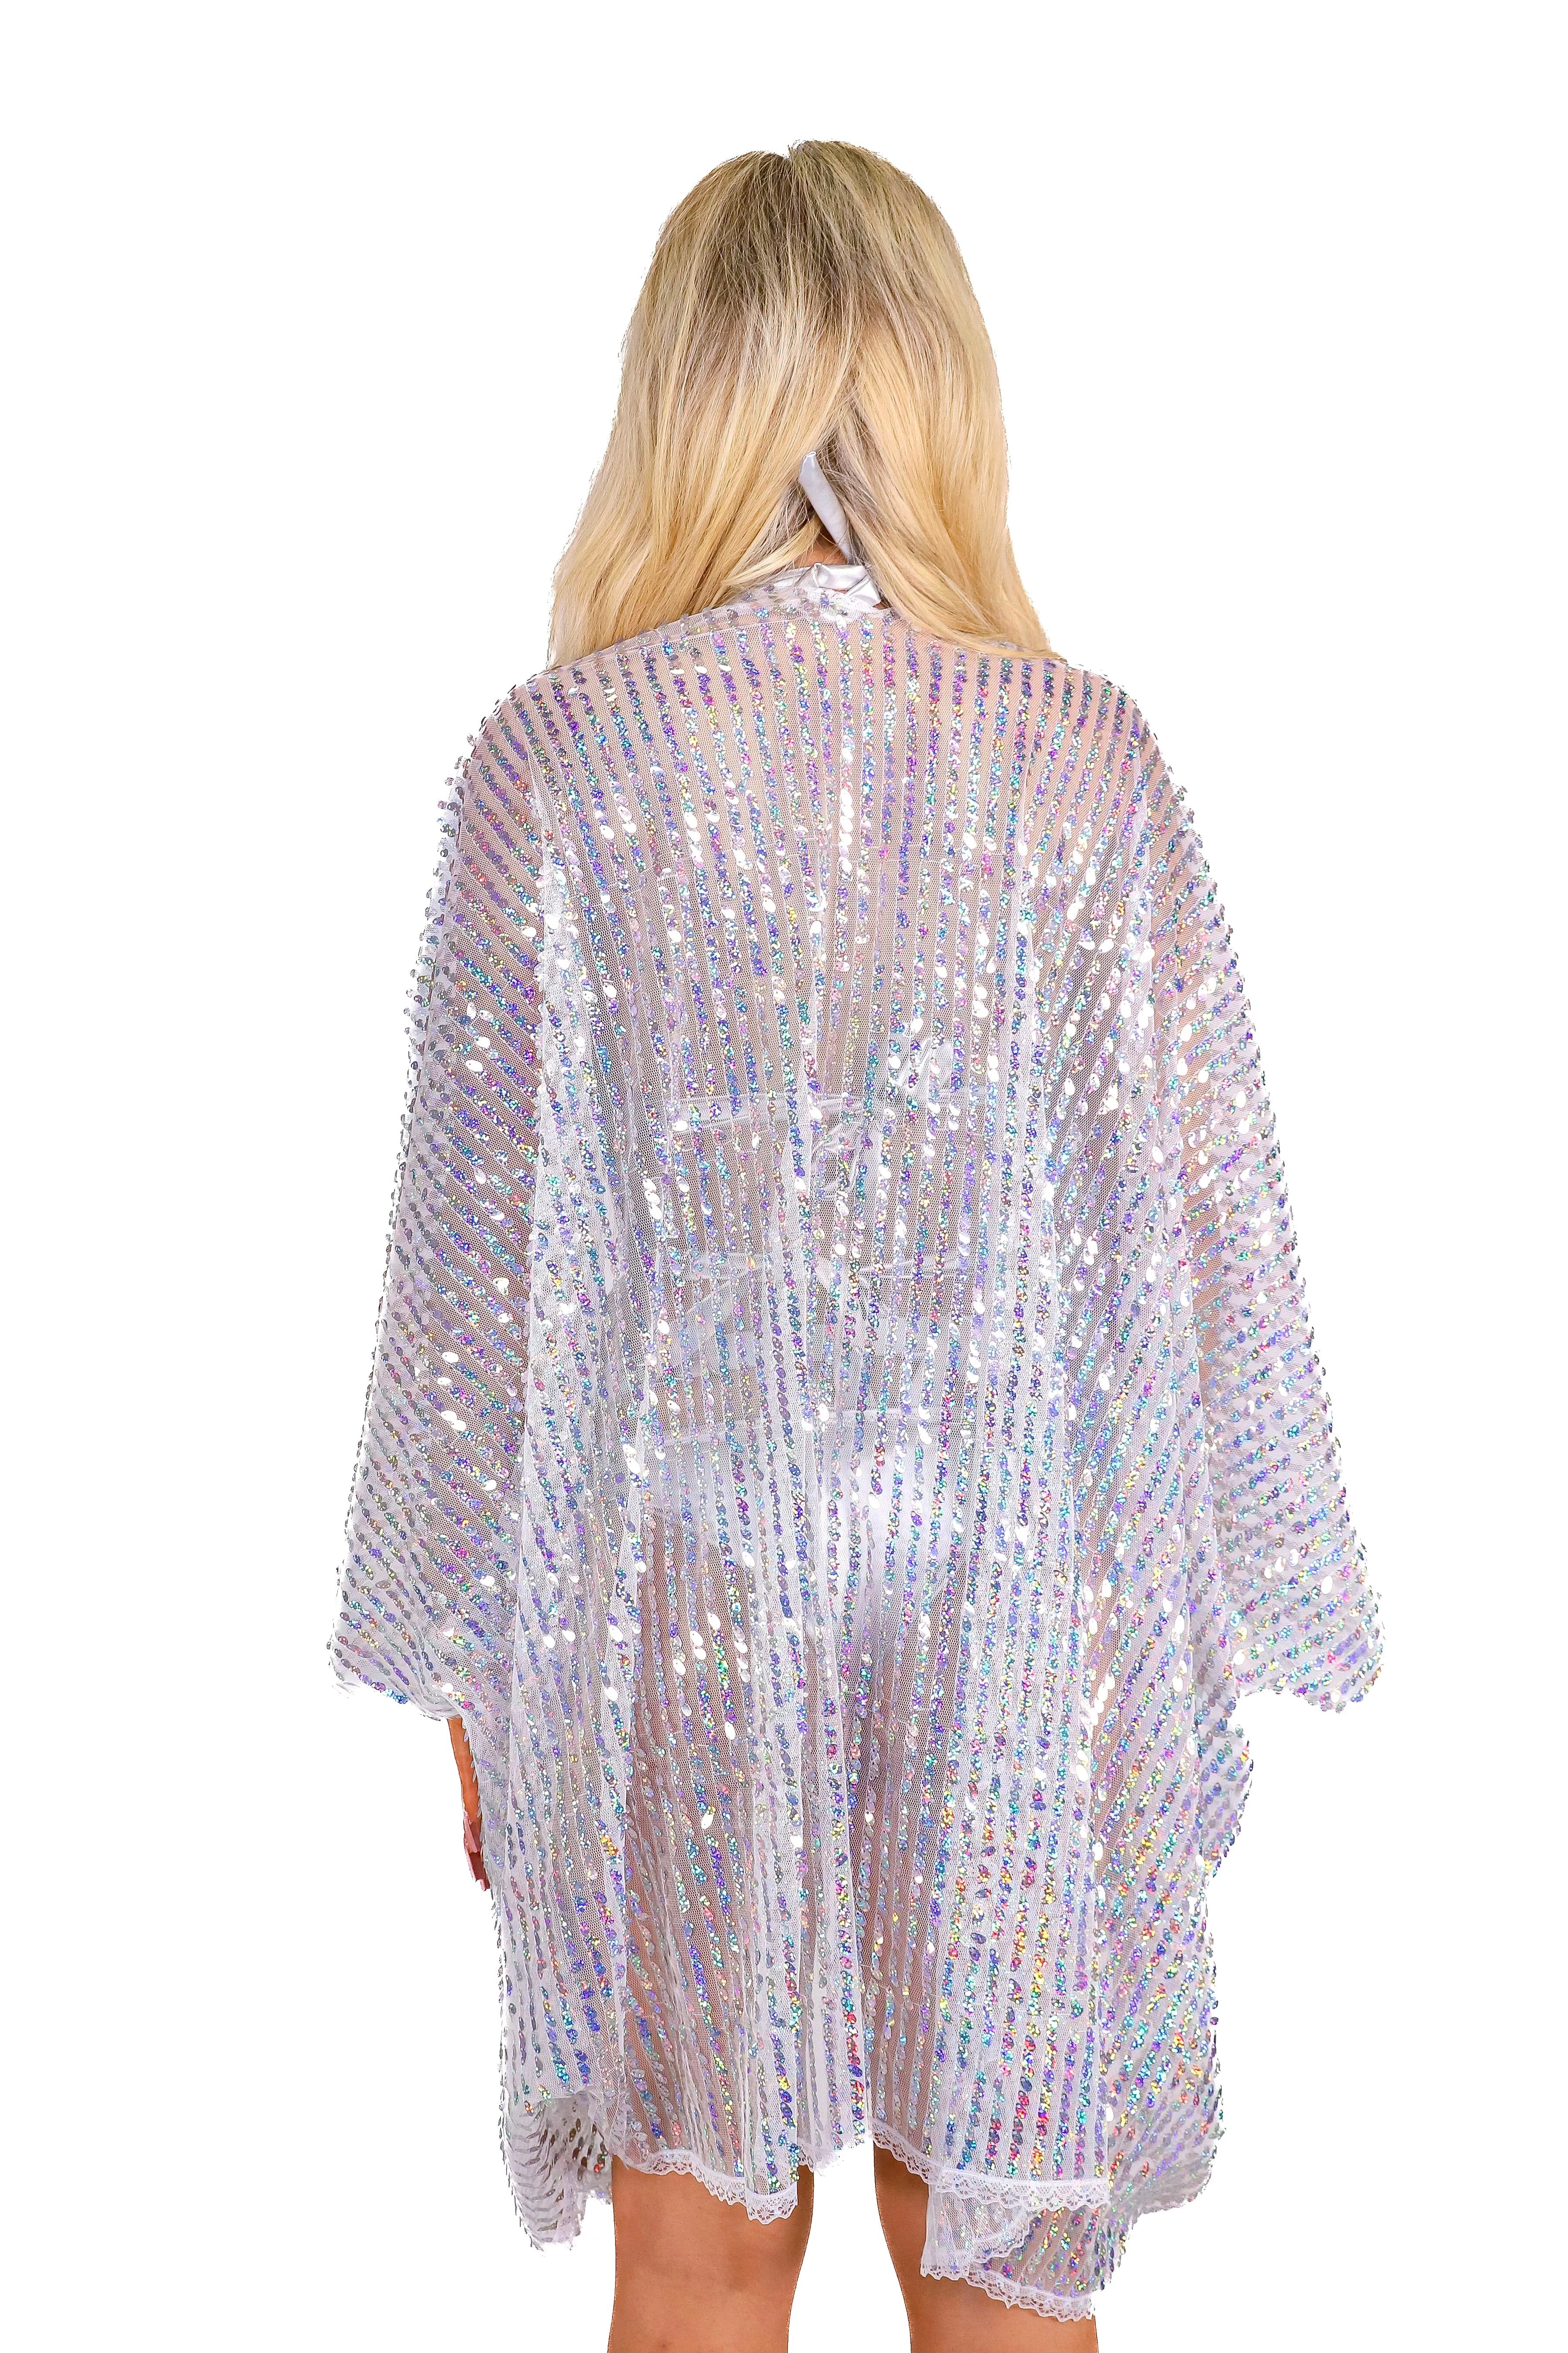 FULL OUTFIT- Silver Holographic Disco Diva (4 pcs)